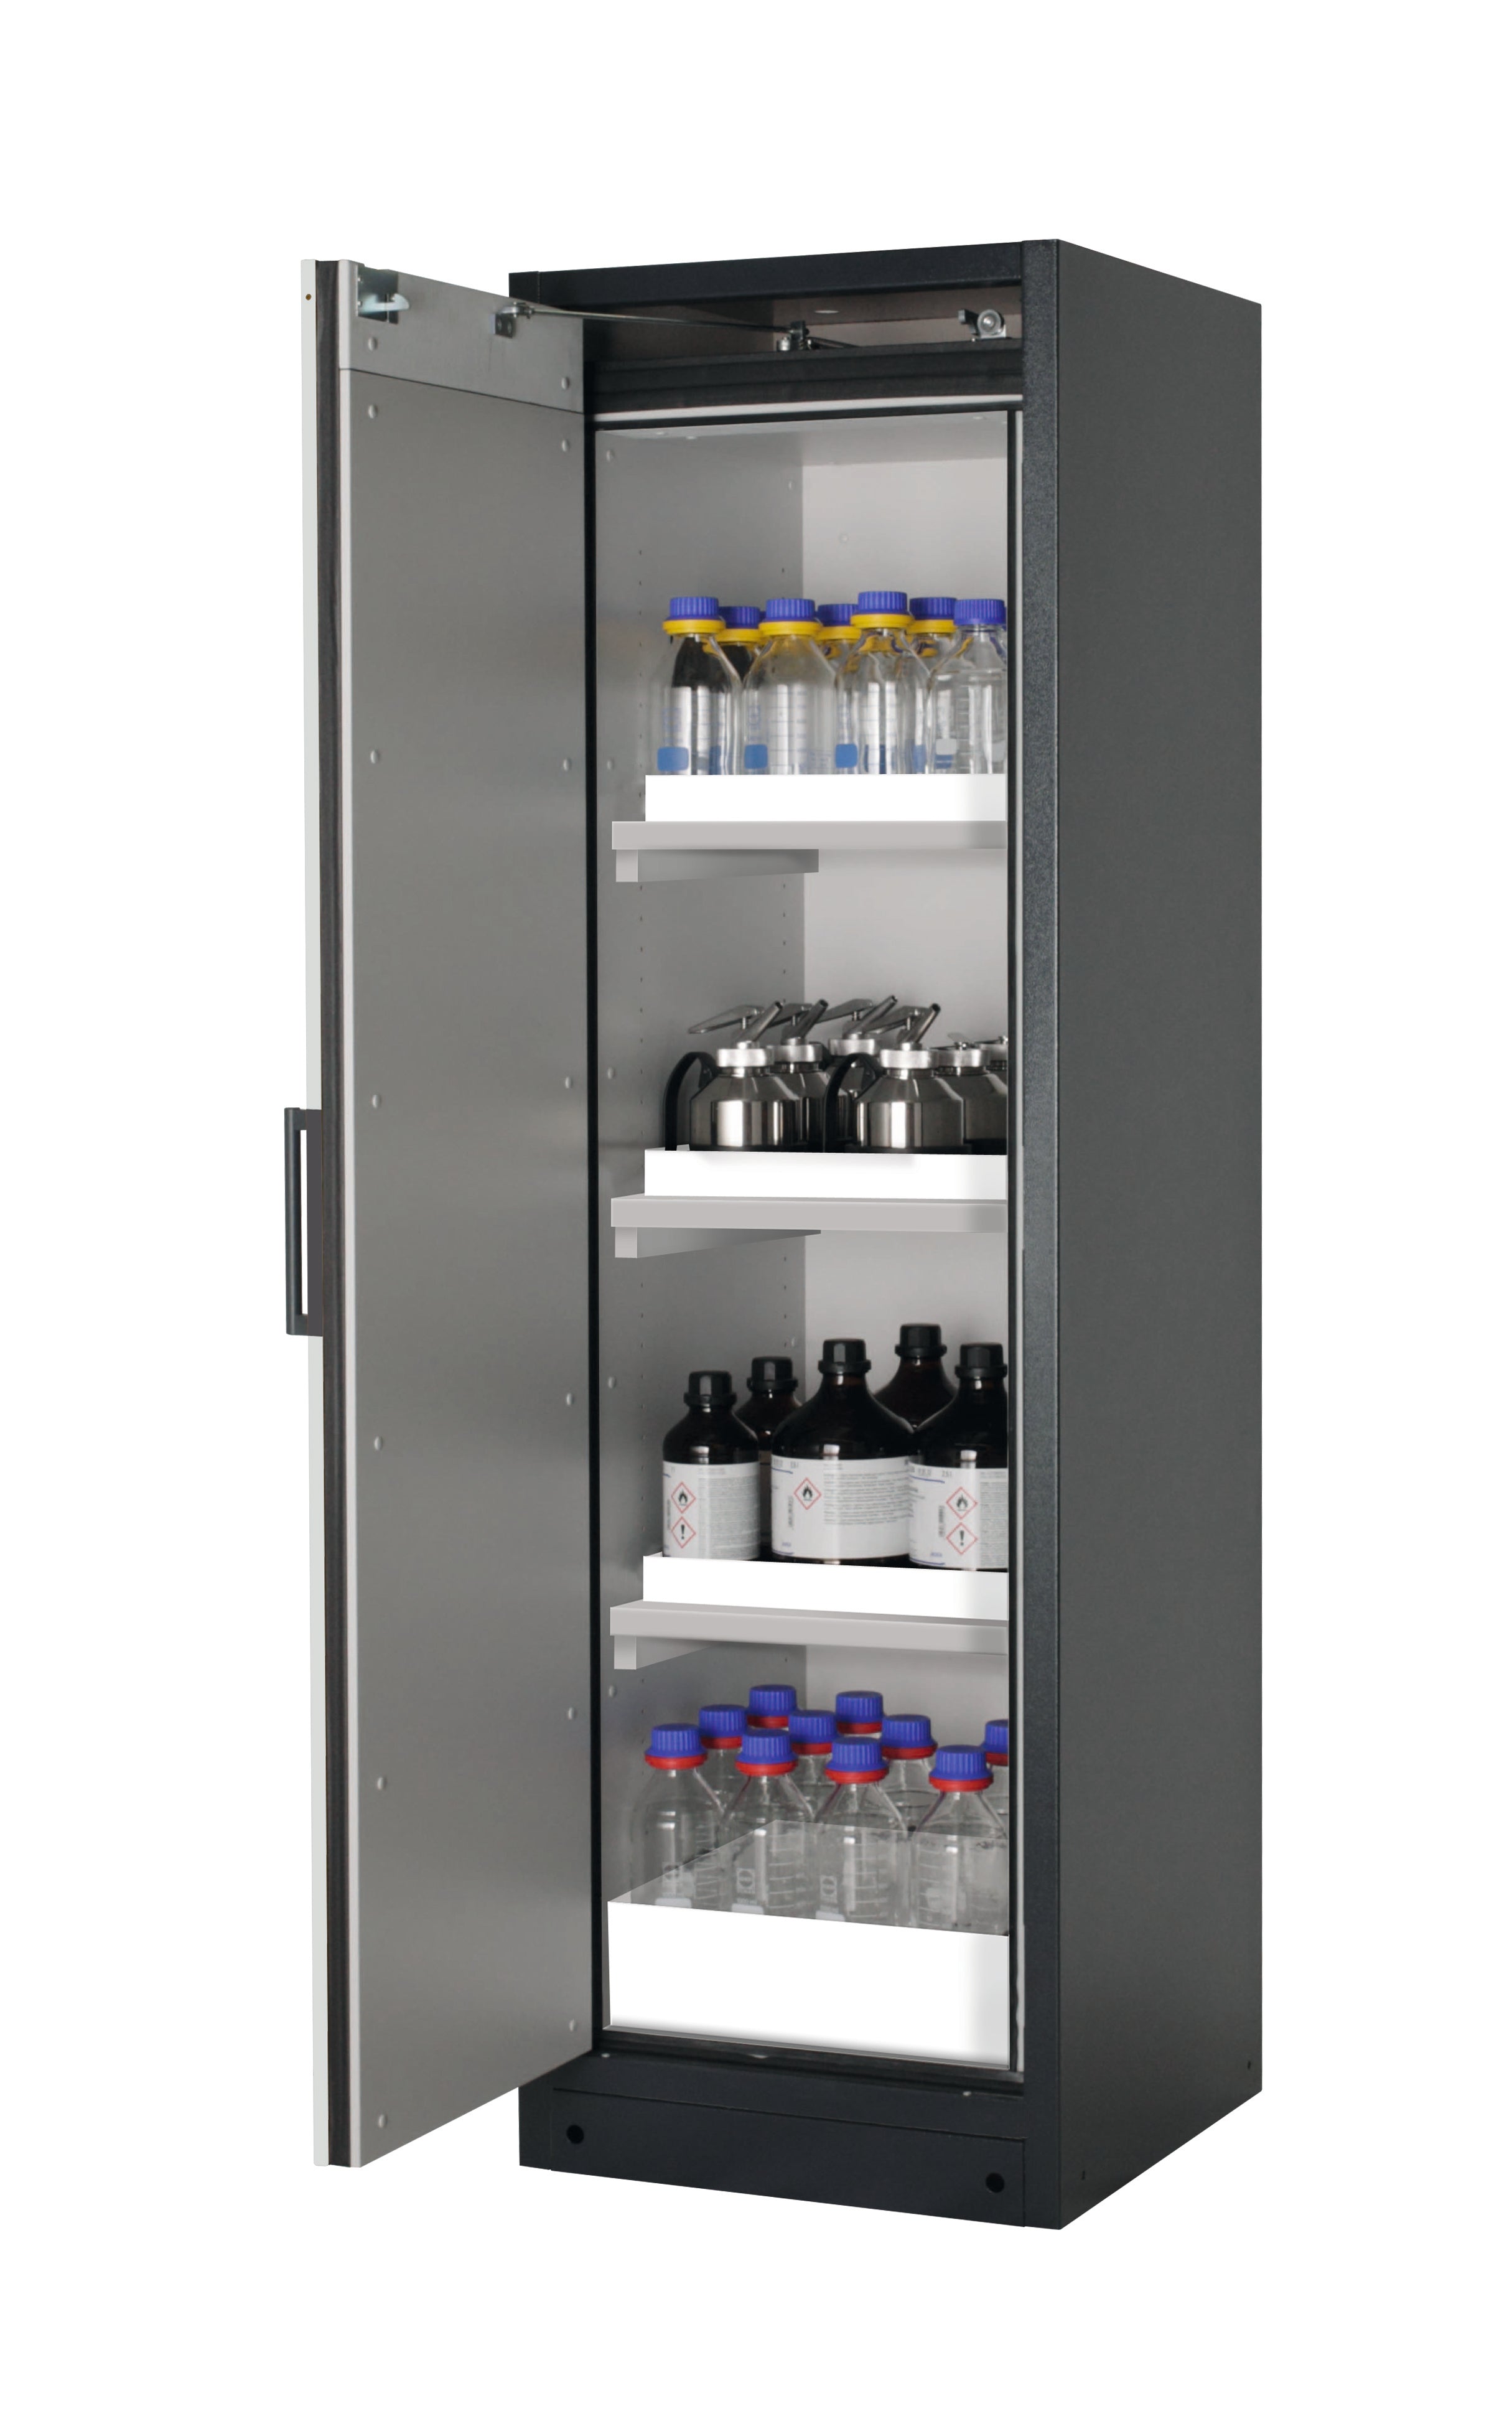 Type 90 safety storage cabinet Q-CLASSIC-90 model Q90.195.060 in light grey RAL 7035 with 3x tray shelf (standard) (polypropylene),